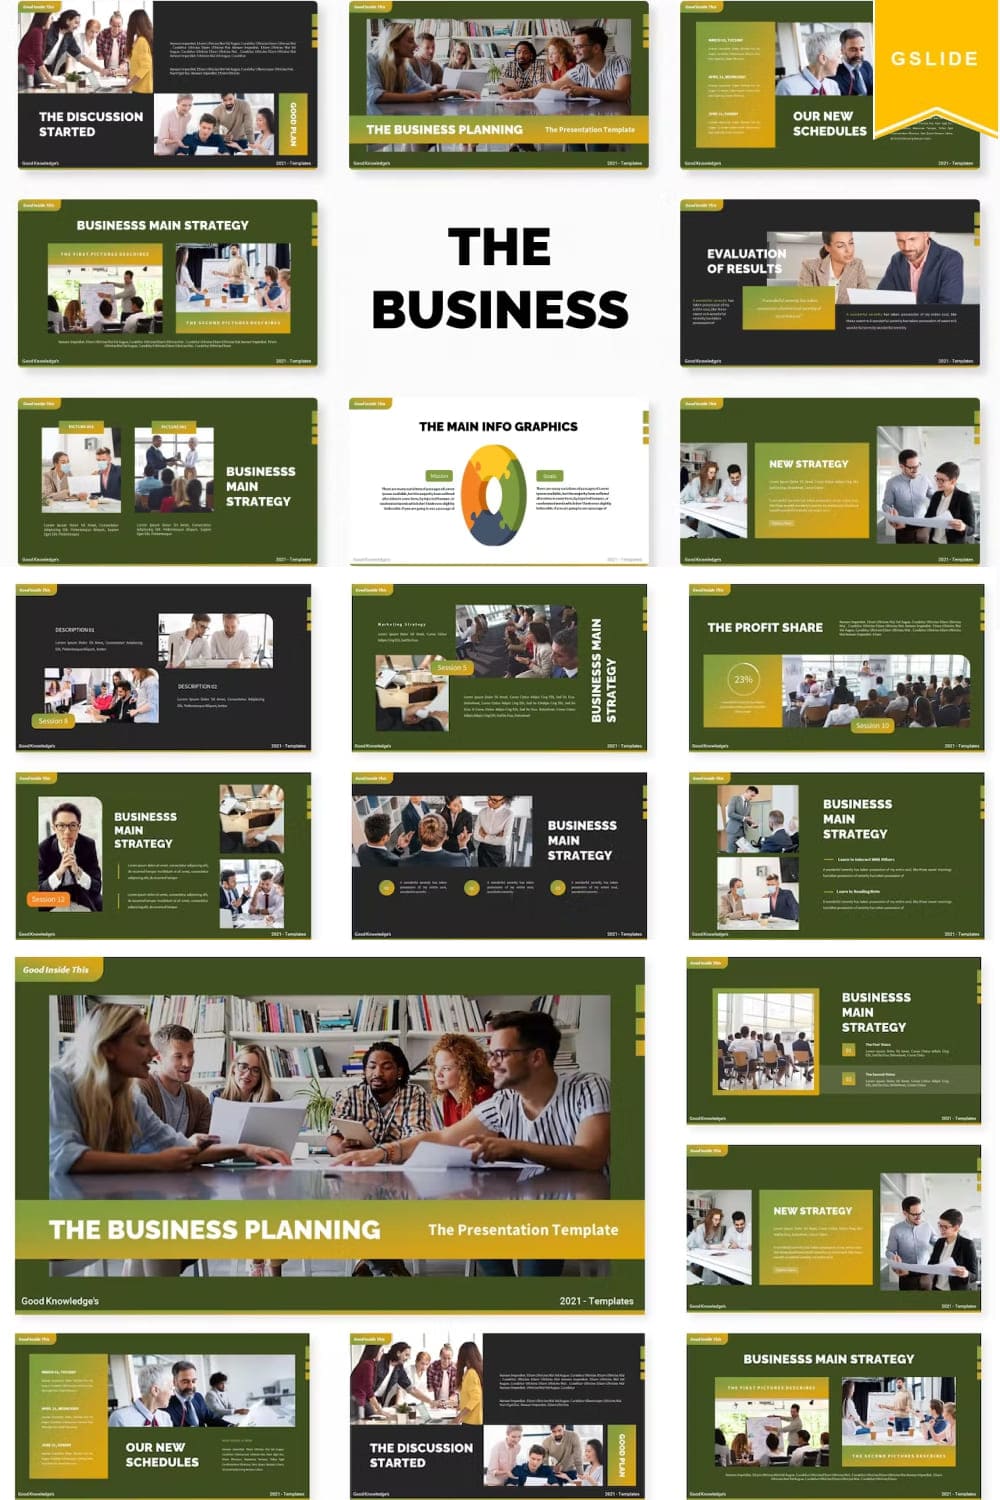 Business planning google slides template, picture 1000x1500 for Pinterest.